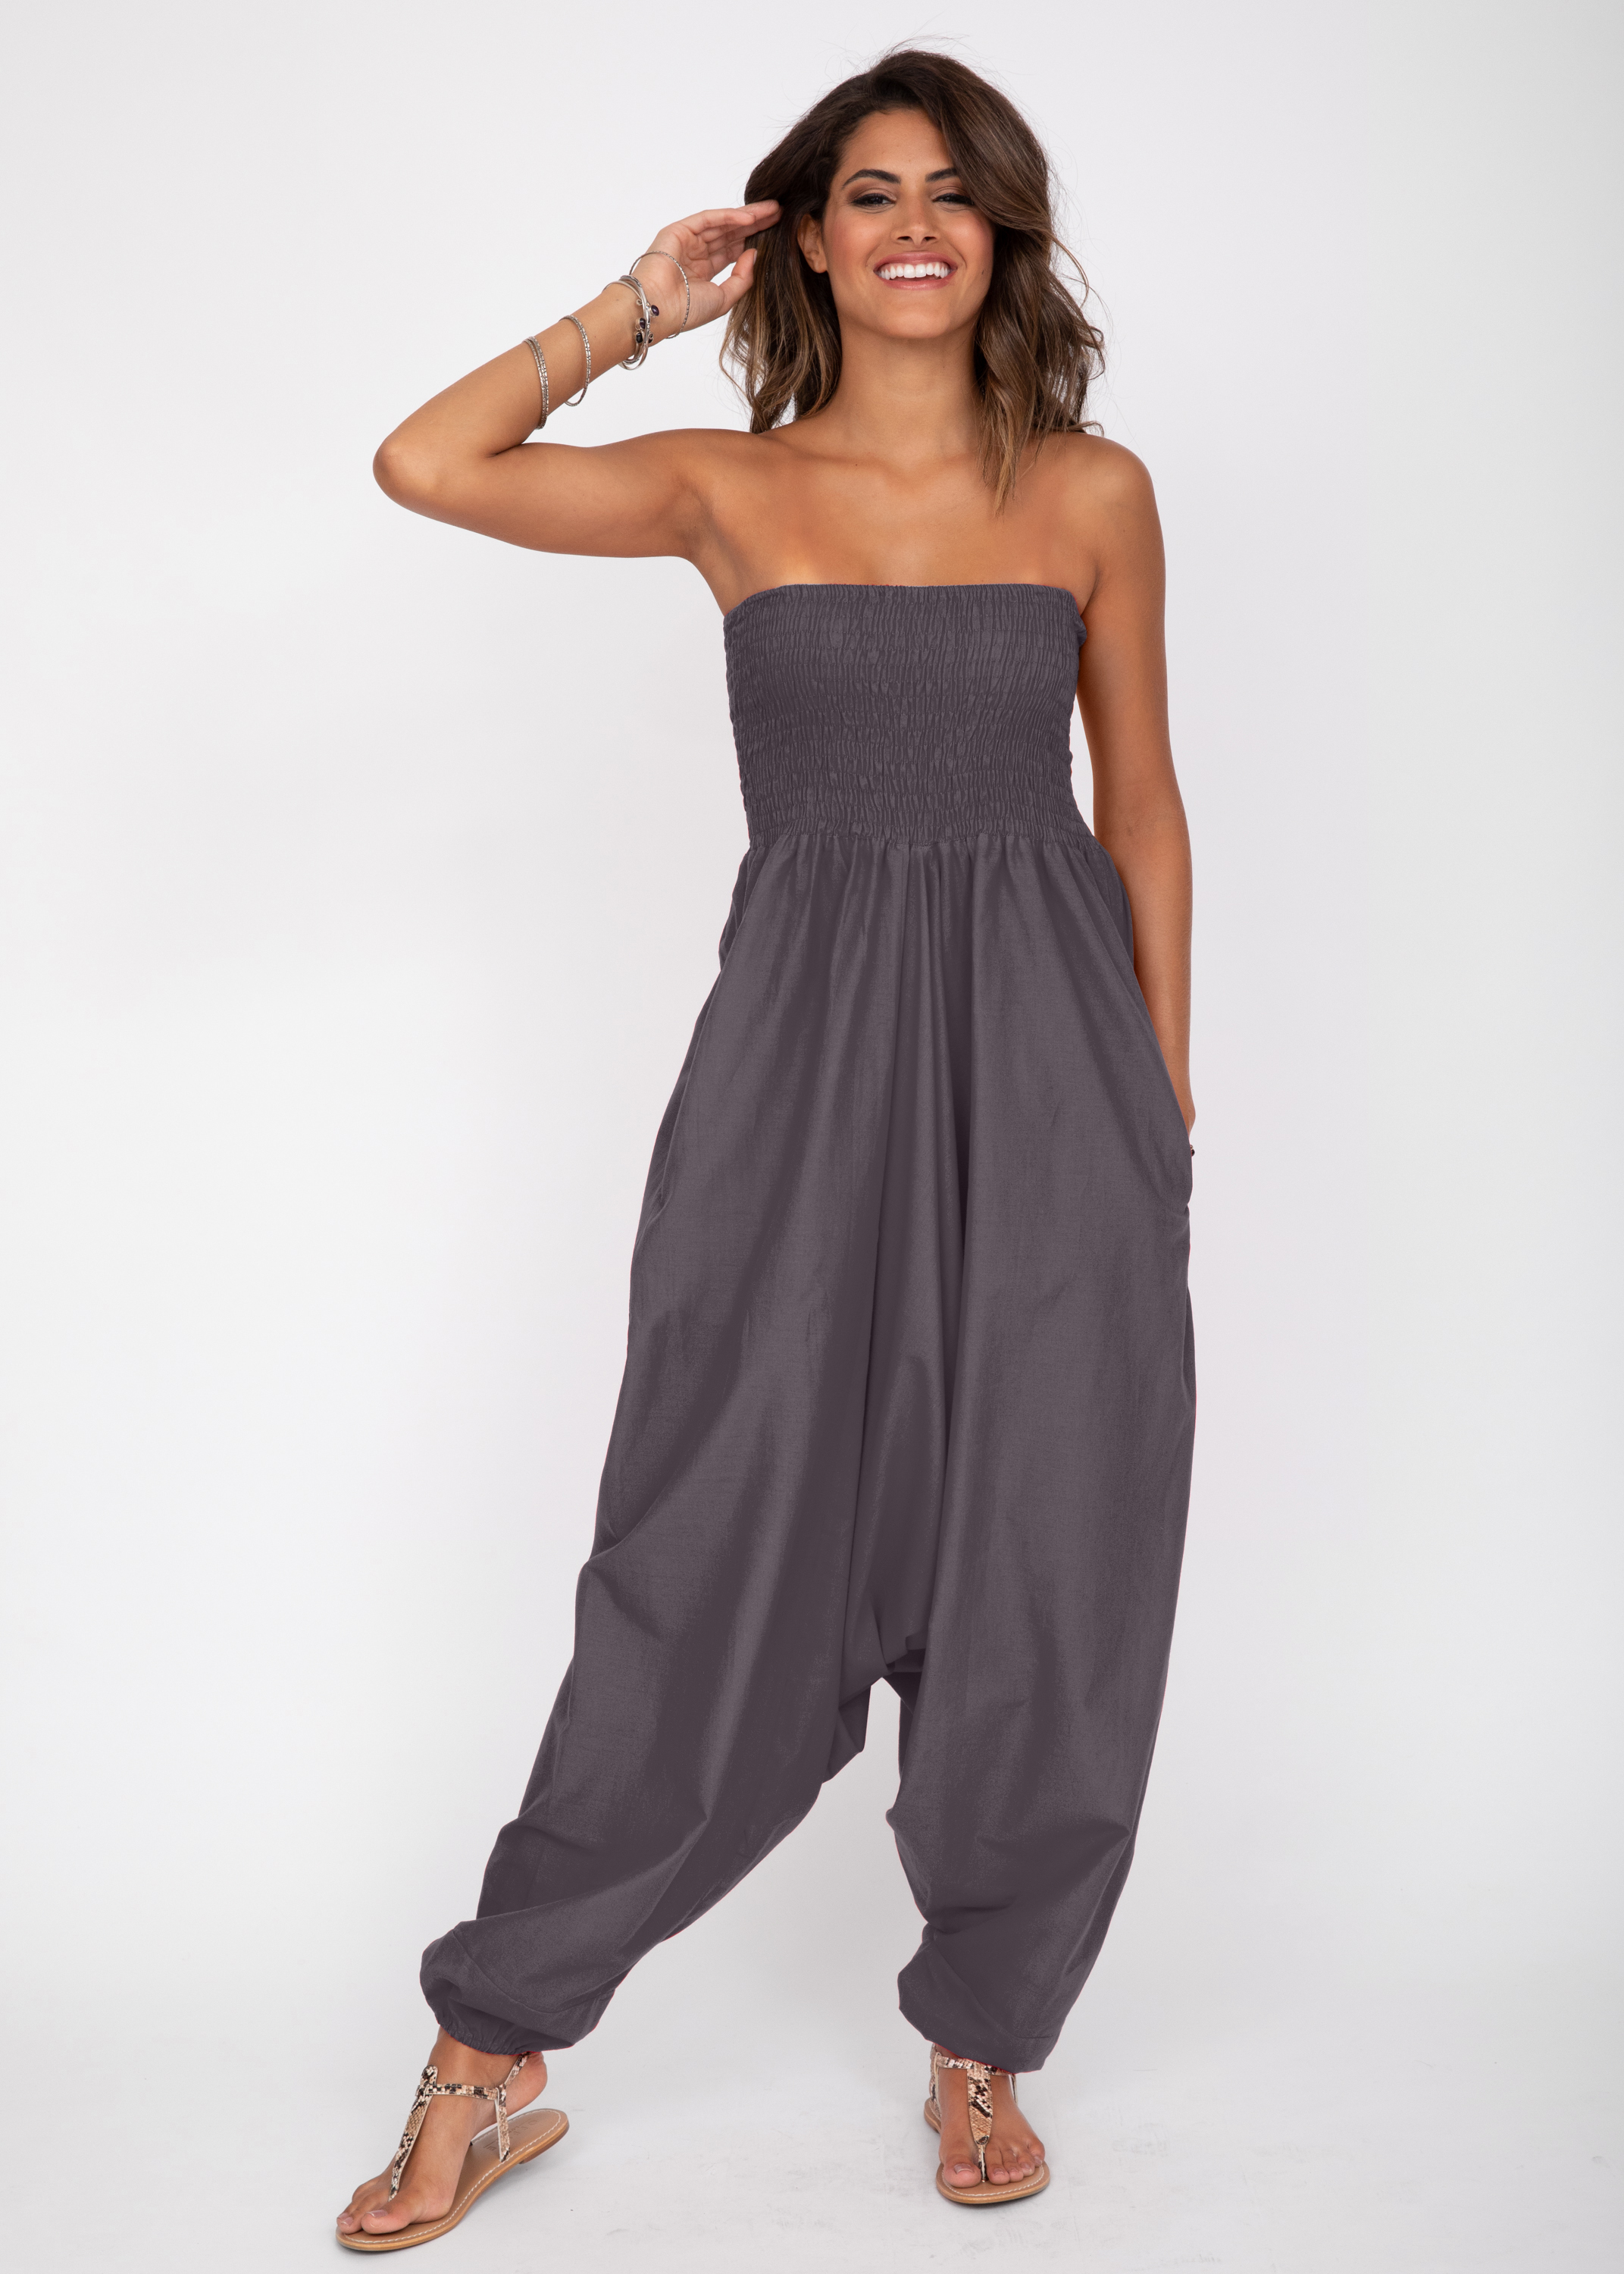 strapless jumpsuit outfit